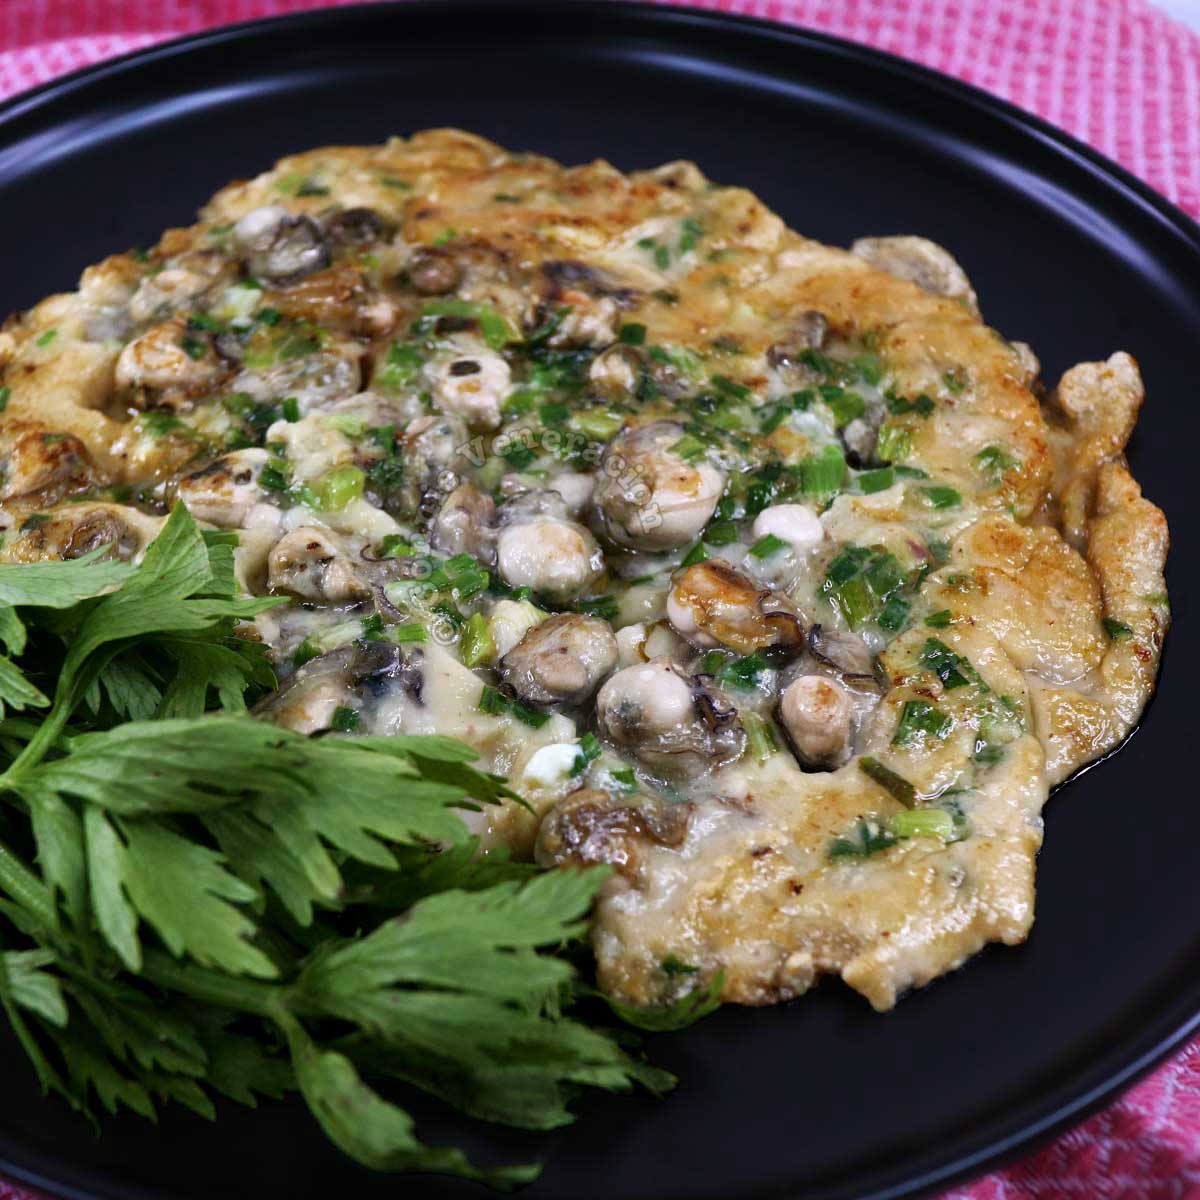 Taiwanese-style oyster omelette